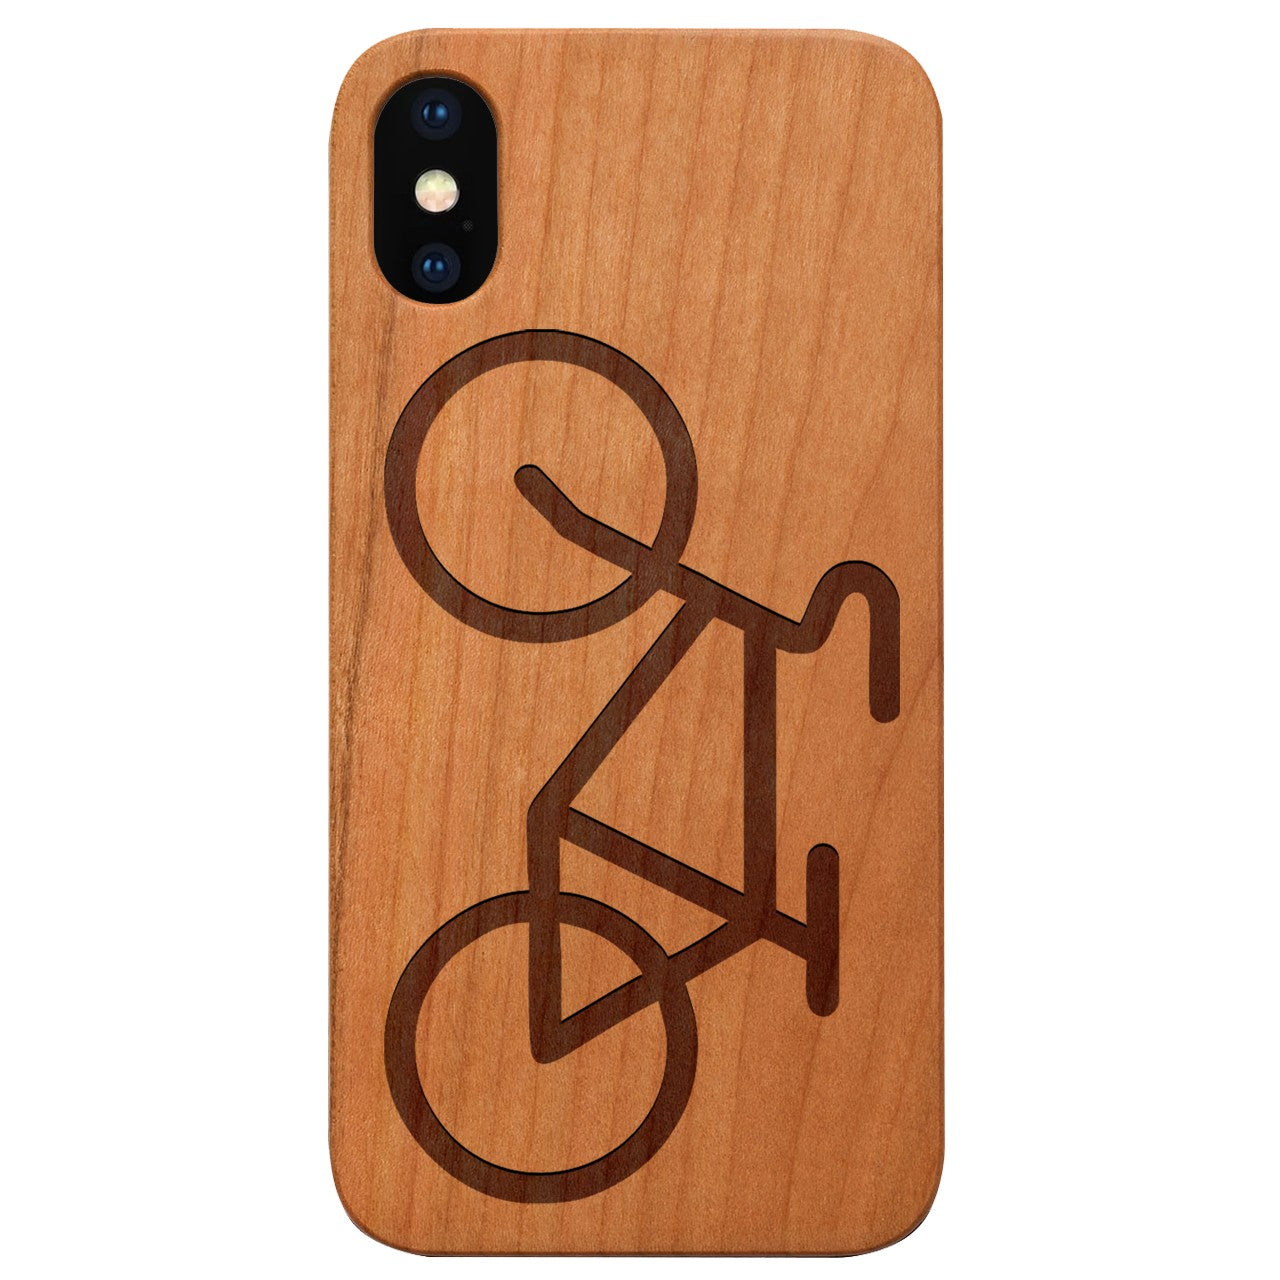  Bicycle - Engraved - Wooden Phone Case - IPhone 13 Models